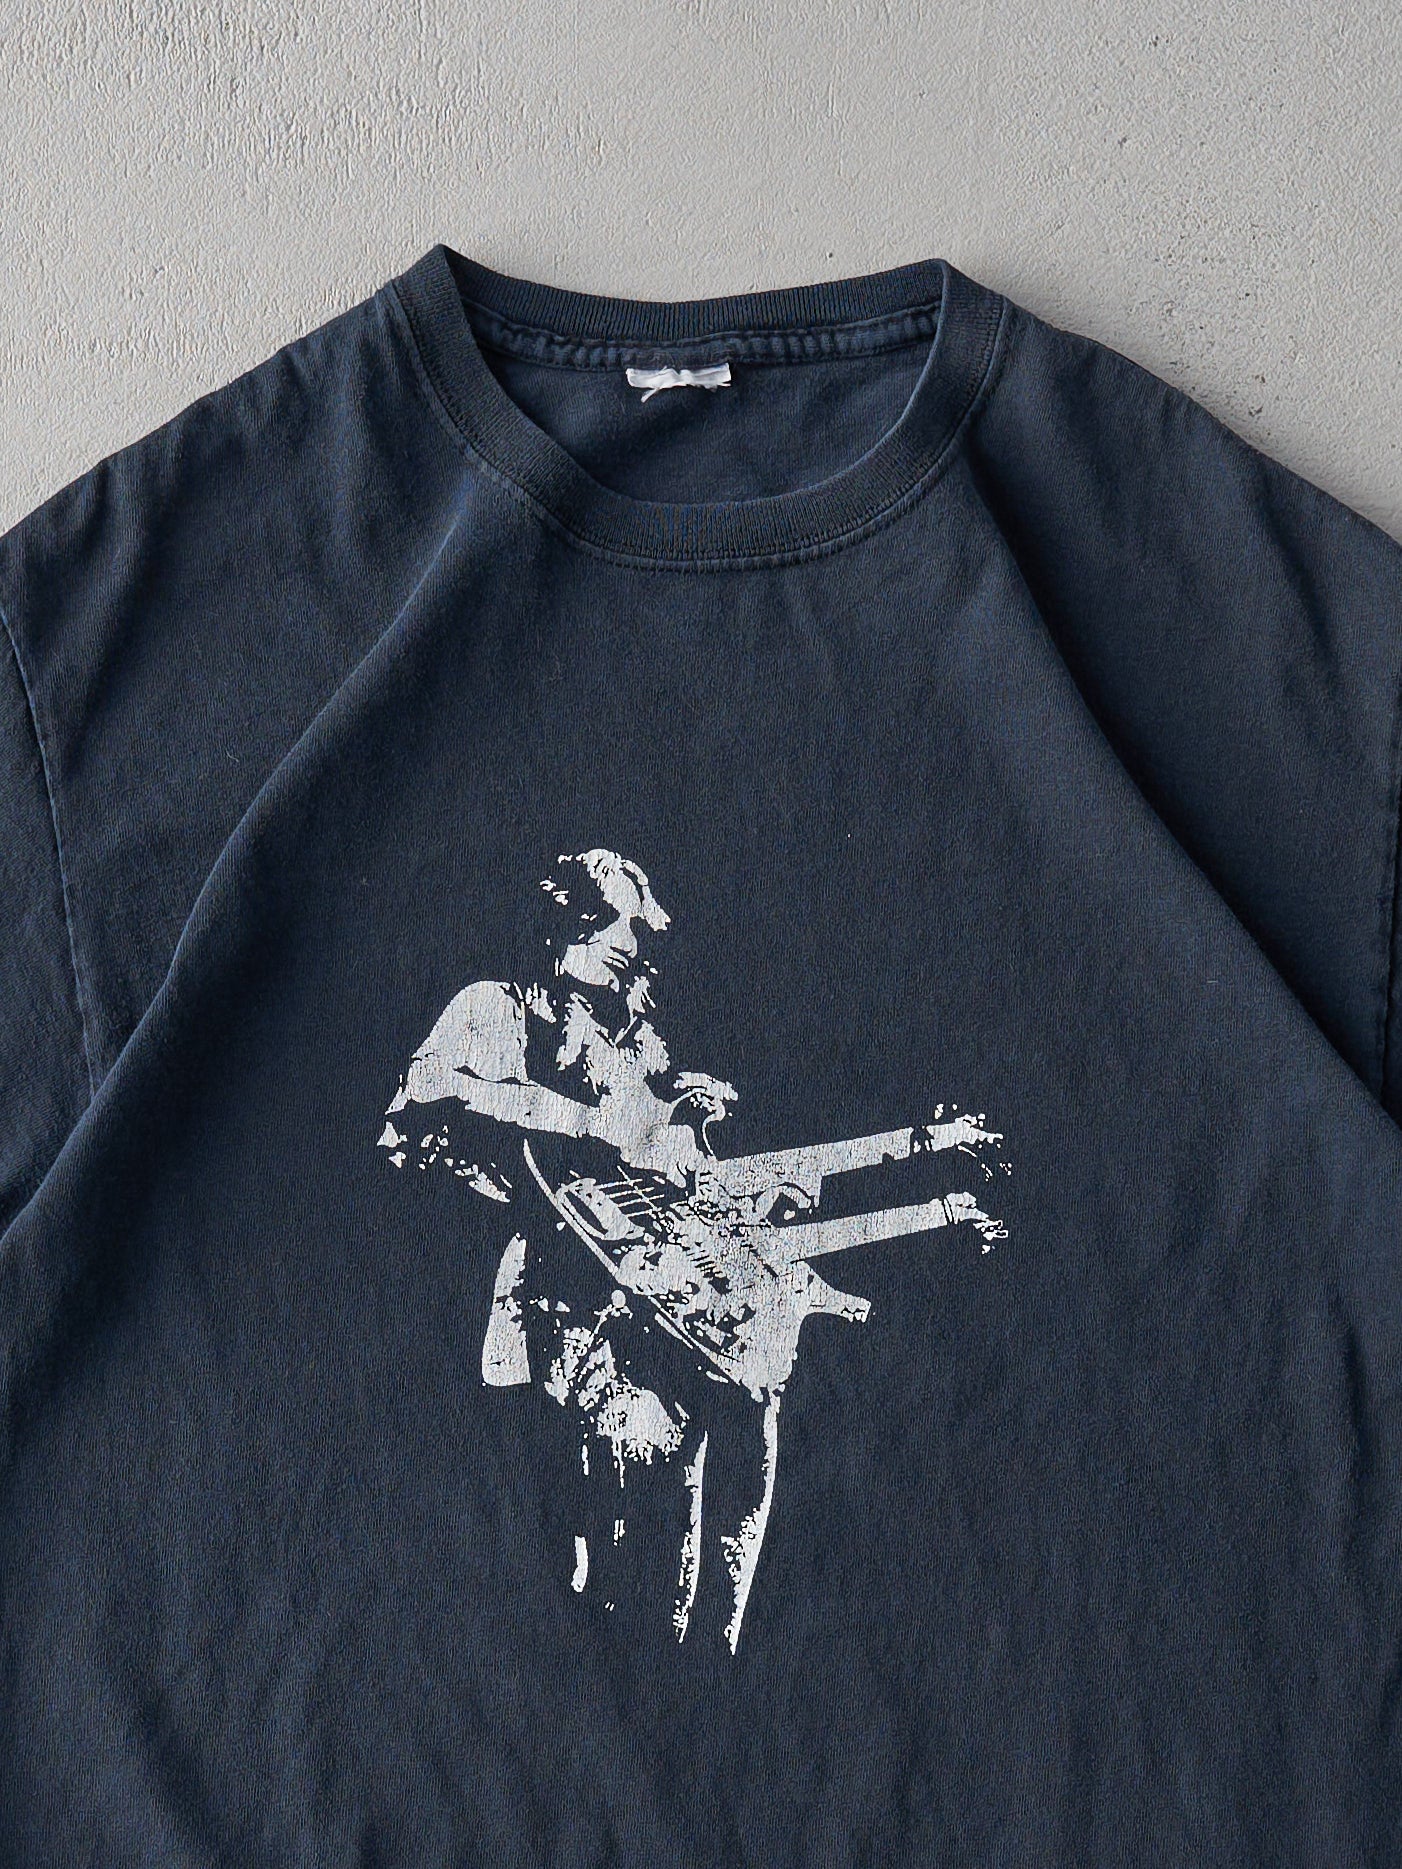 Vintage Faded Black Jimmy Page Tee (S/M)